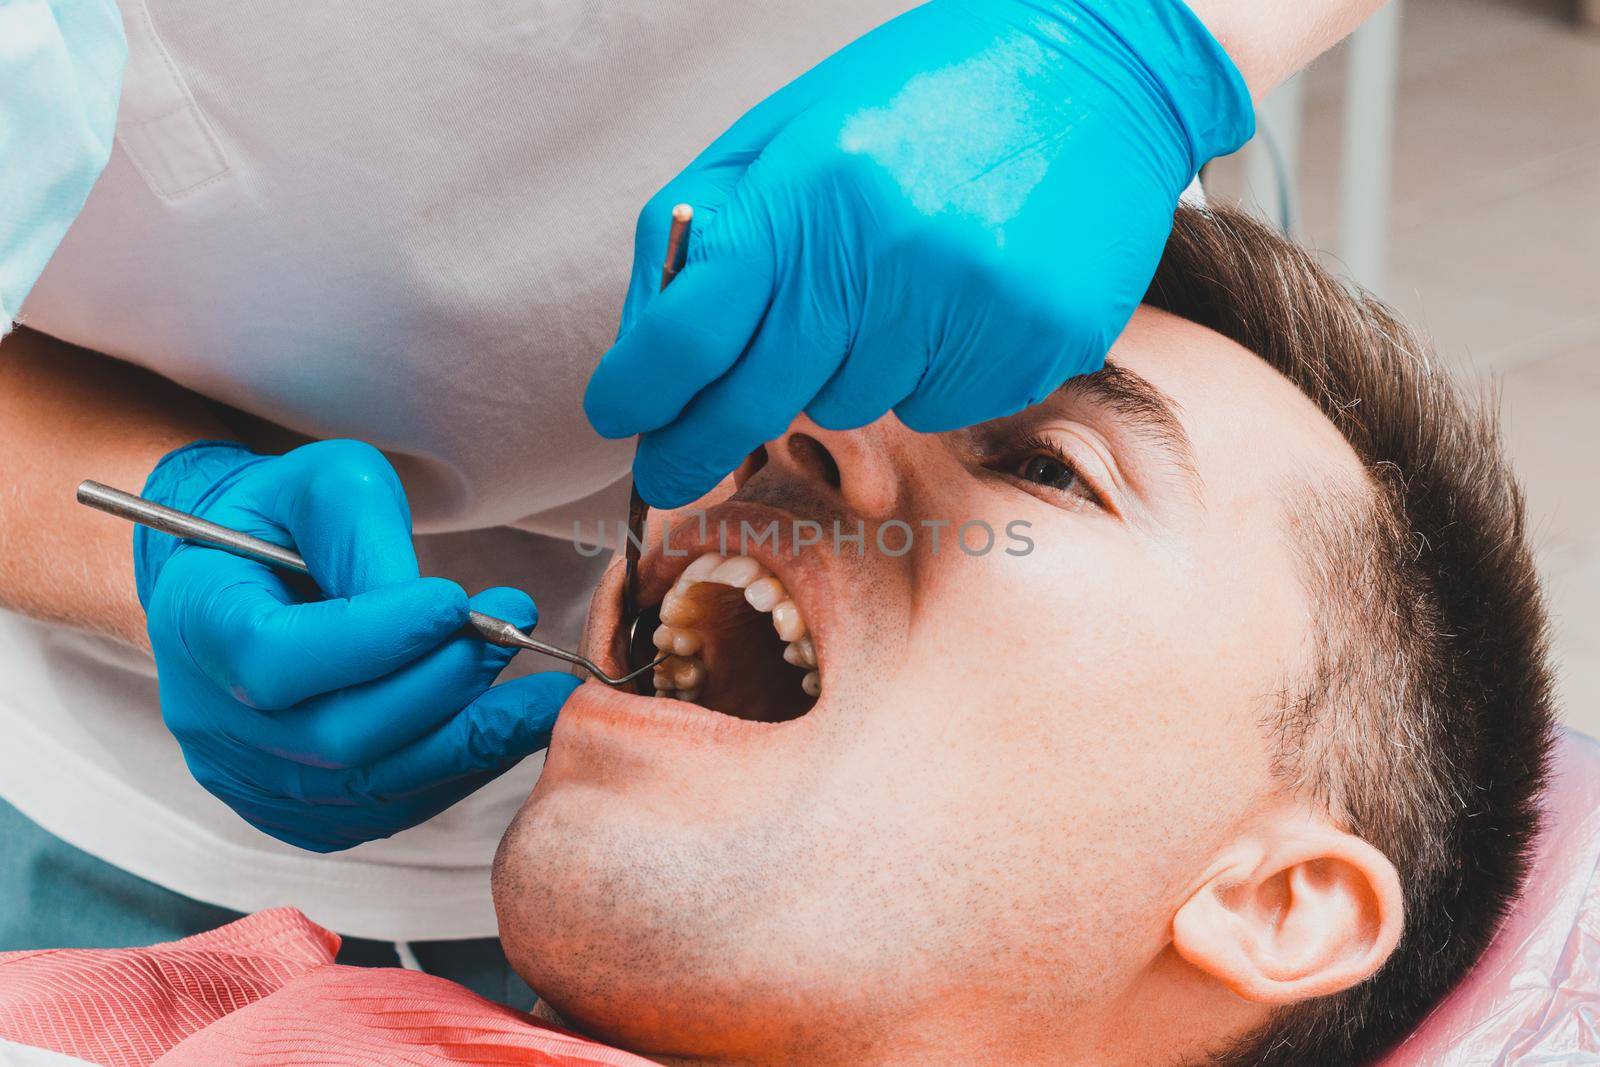 Dental clinic, the patient sits in a dental chair with his mouth wide open, the dentist assesses the condition of the teeth and makes a diagnosis.2020